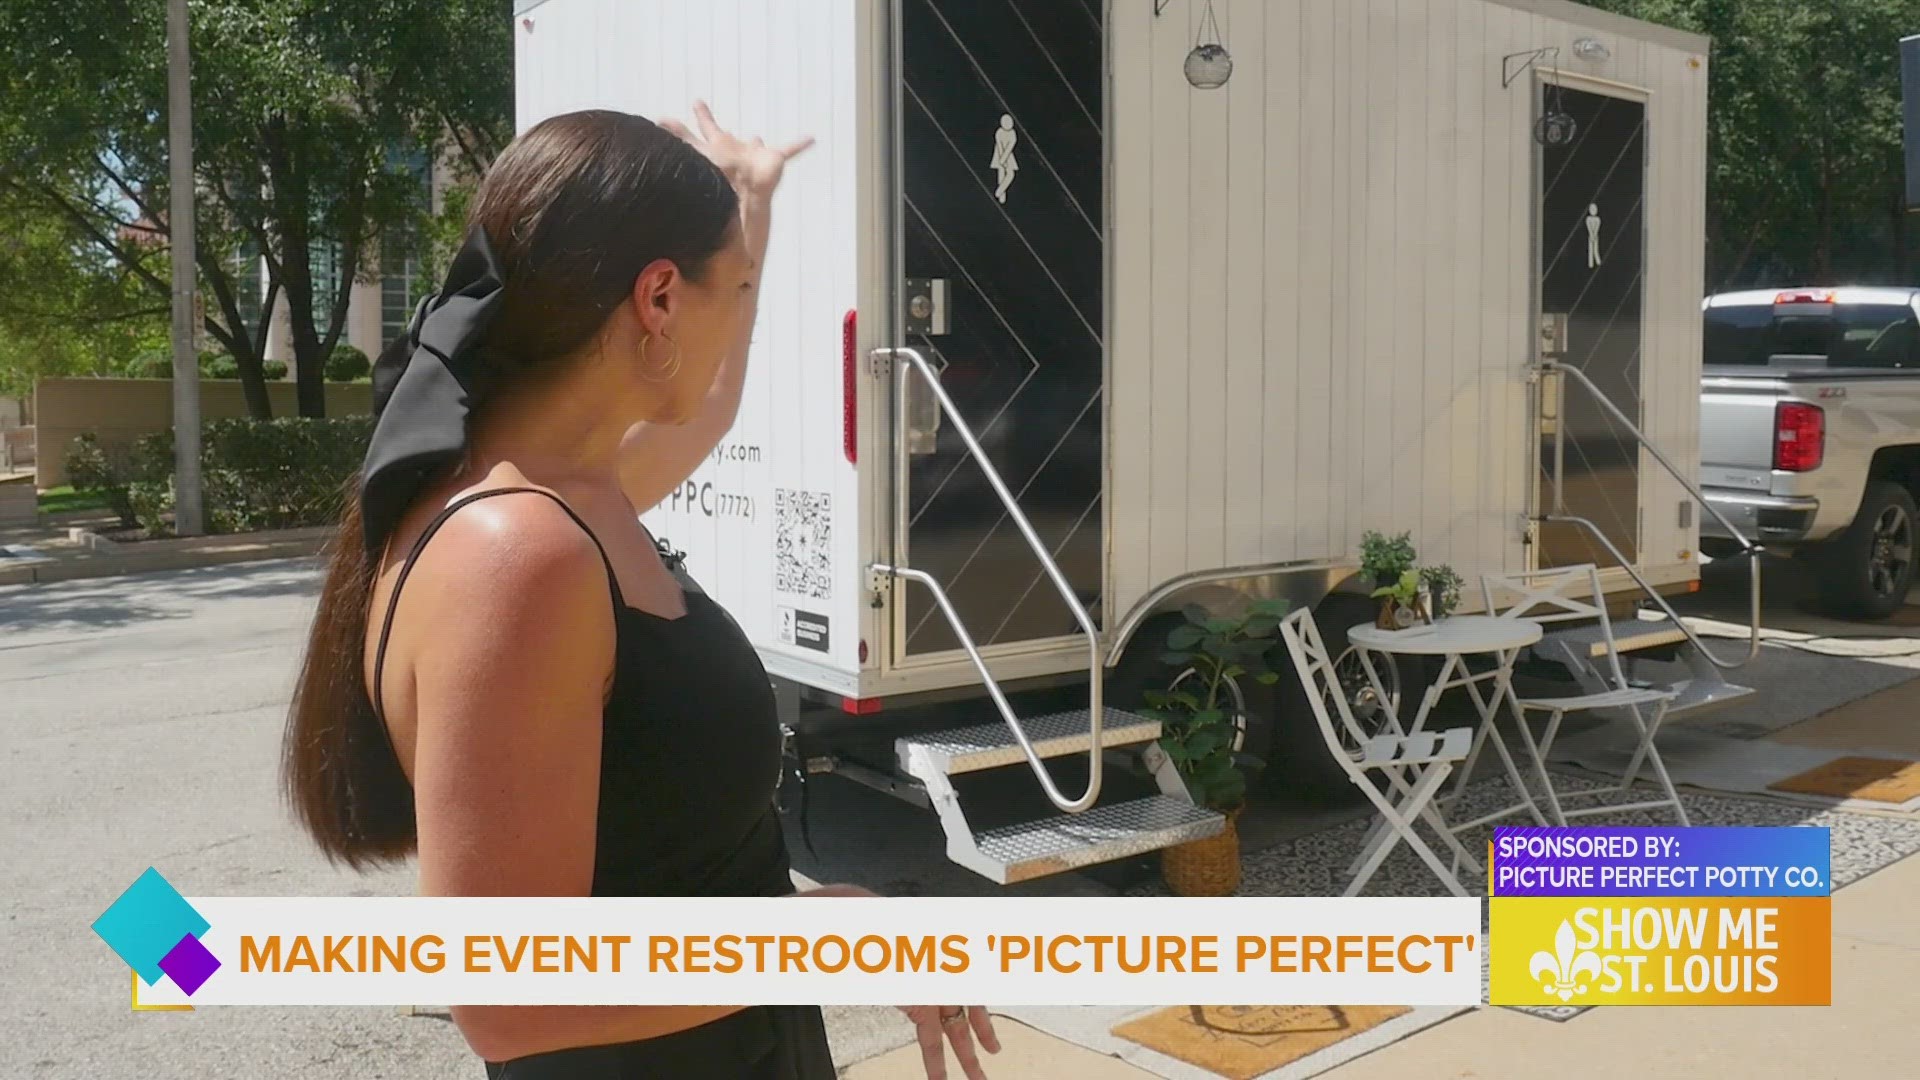 This local business is upping the game when it comes to outdoor event restroom facilities.